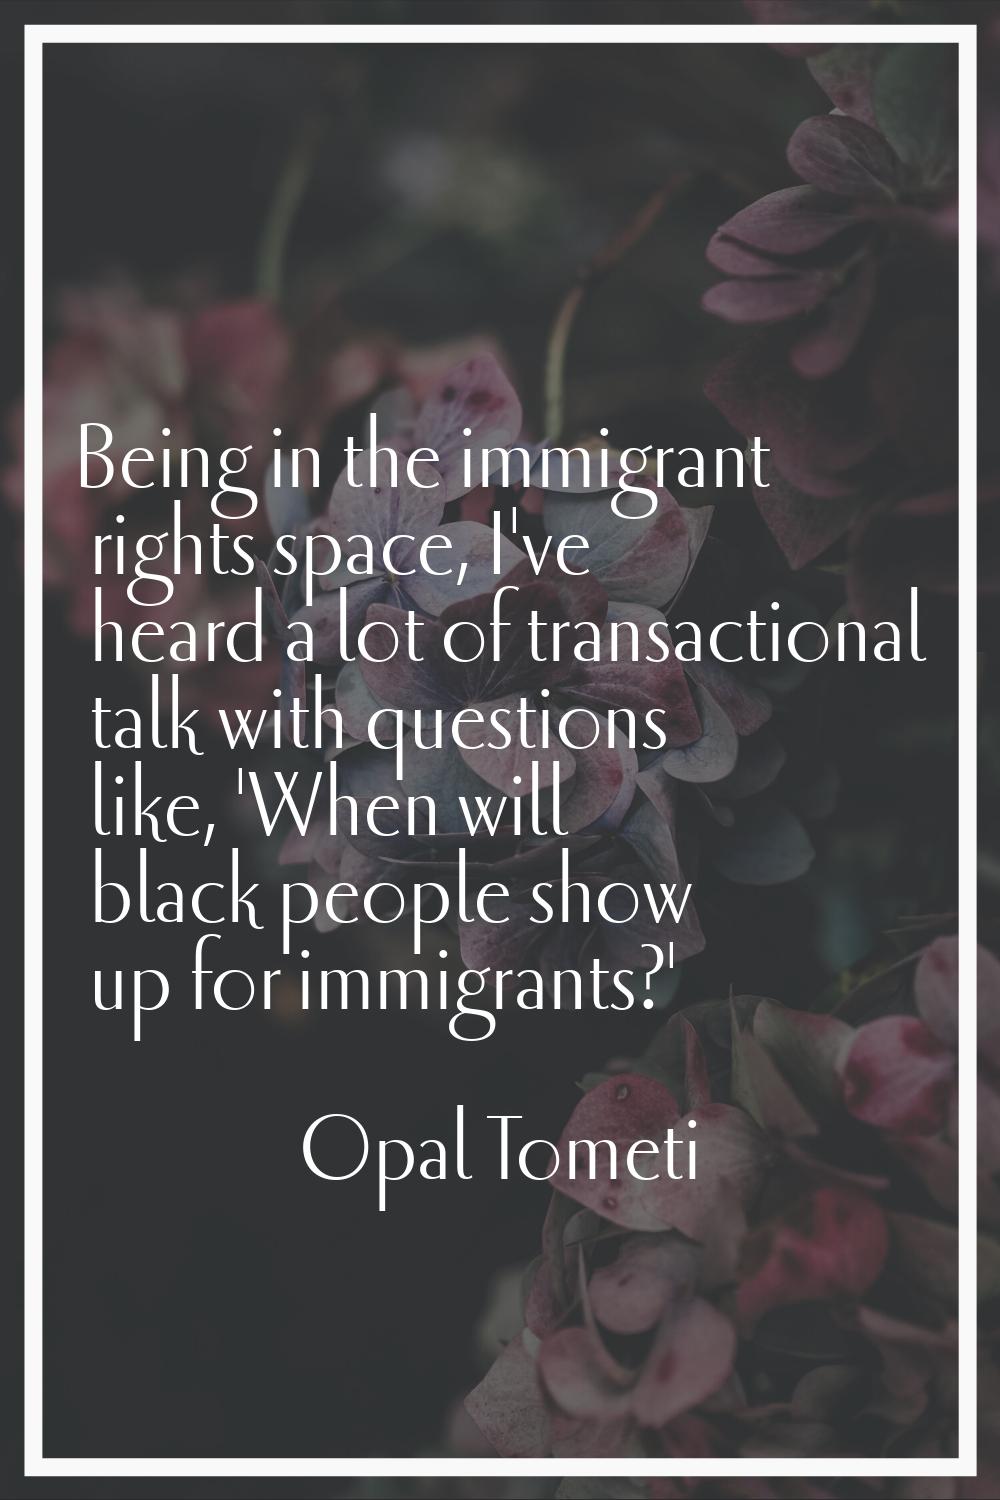 Being in the immigrant rights space, I've heard a lot of transactional talk with questions like, 'W